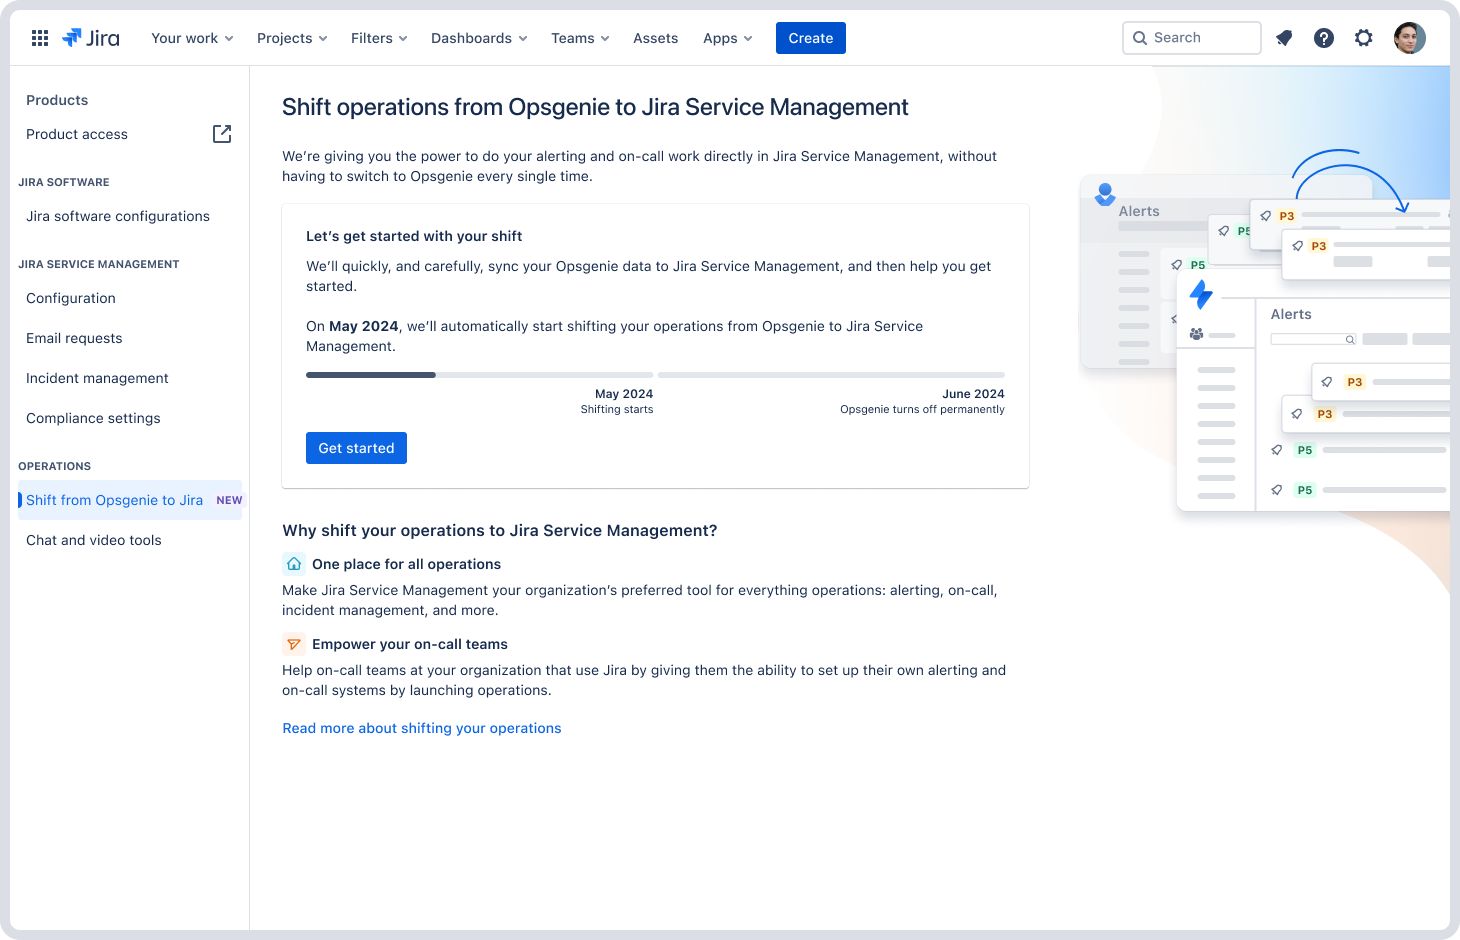 Shift from Opsgenie to Jira page